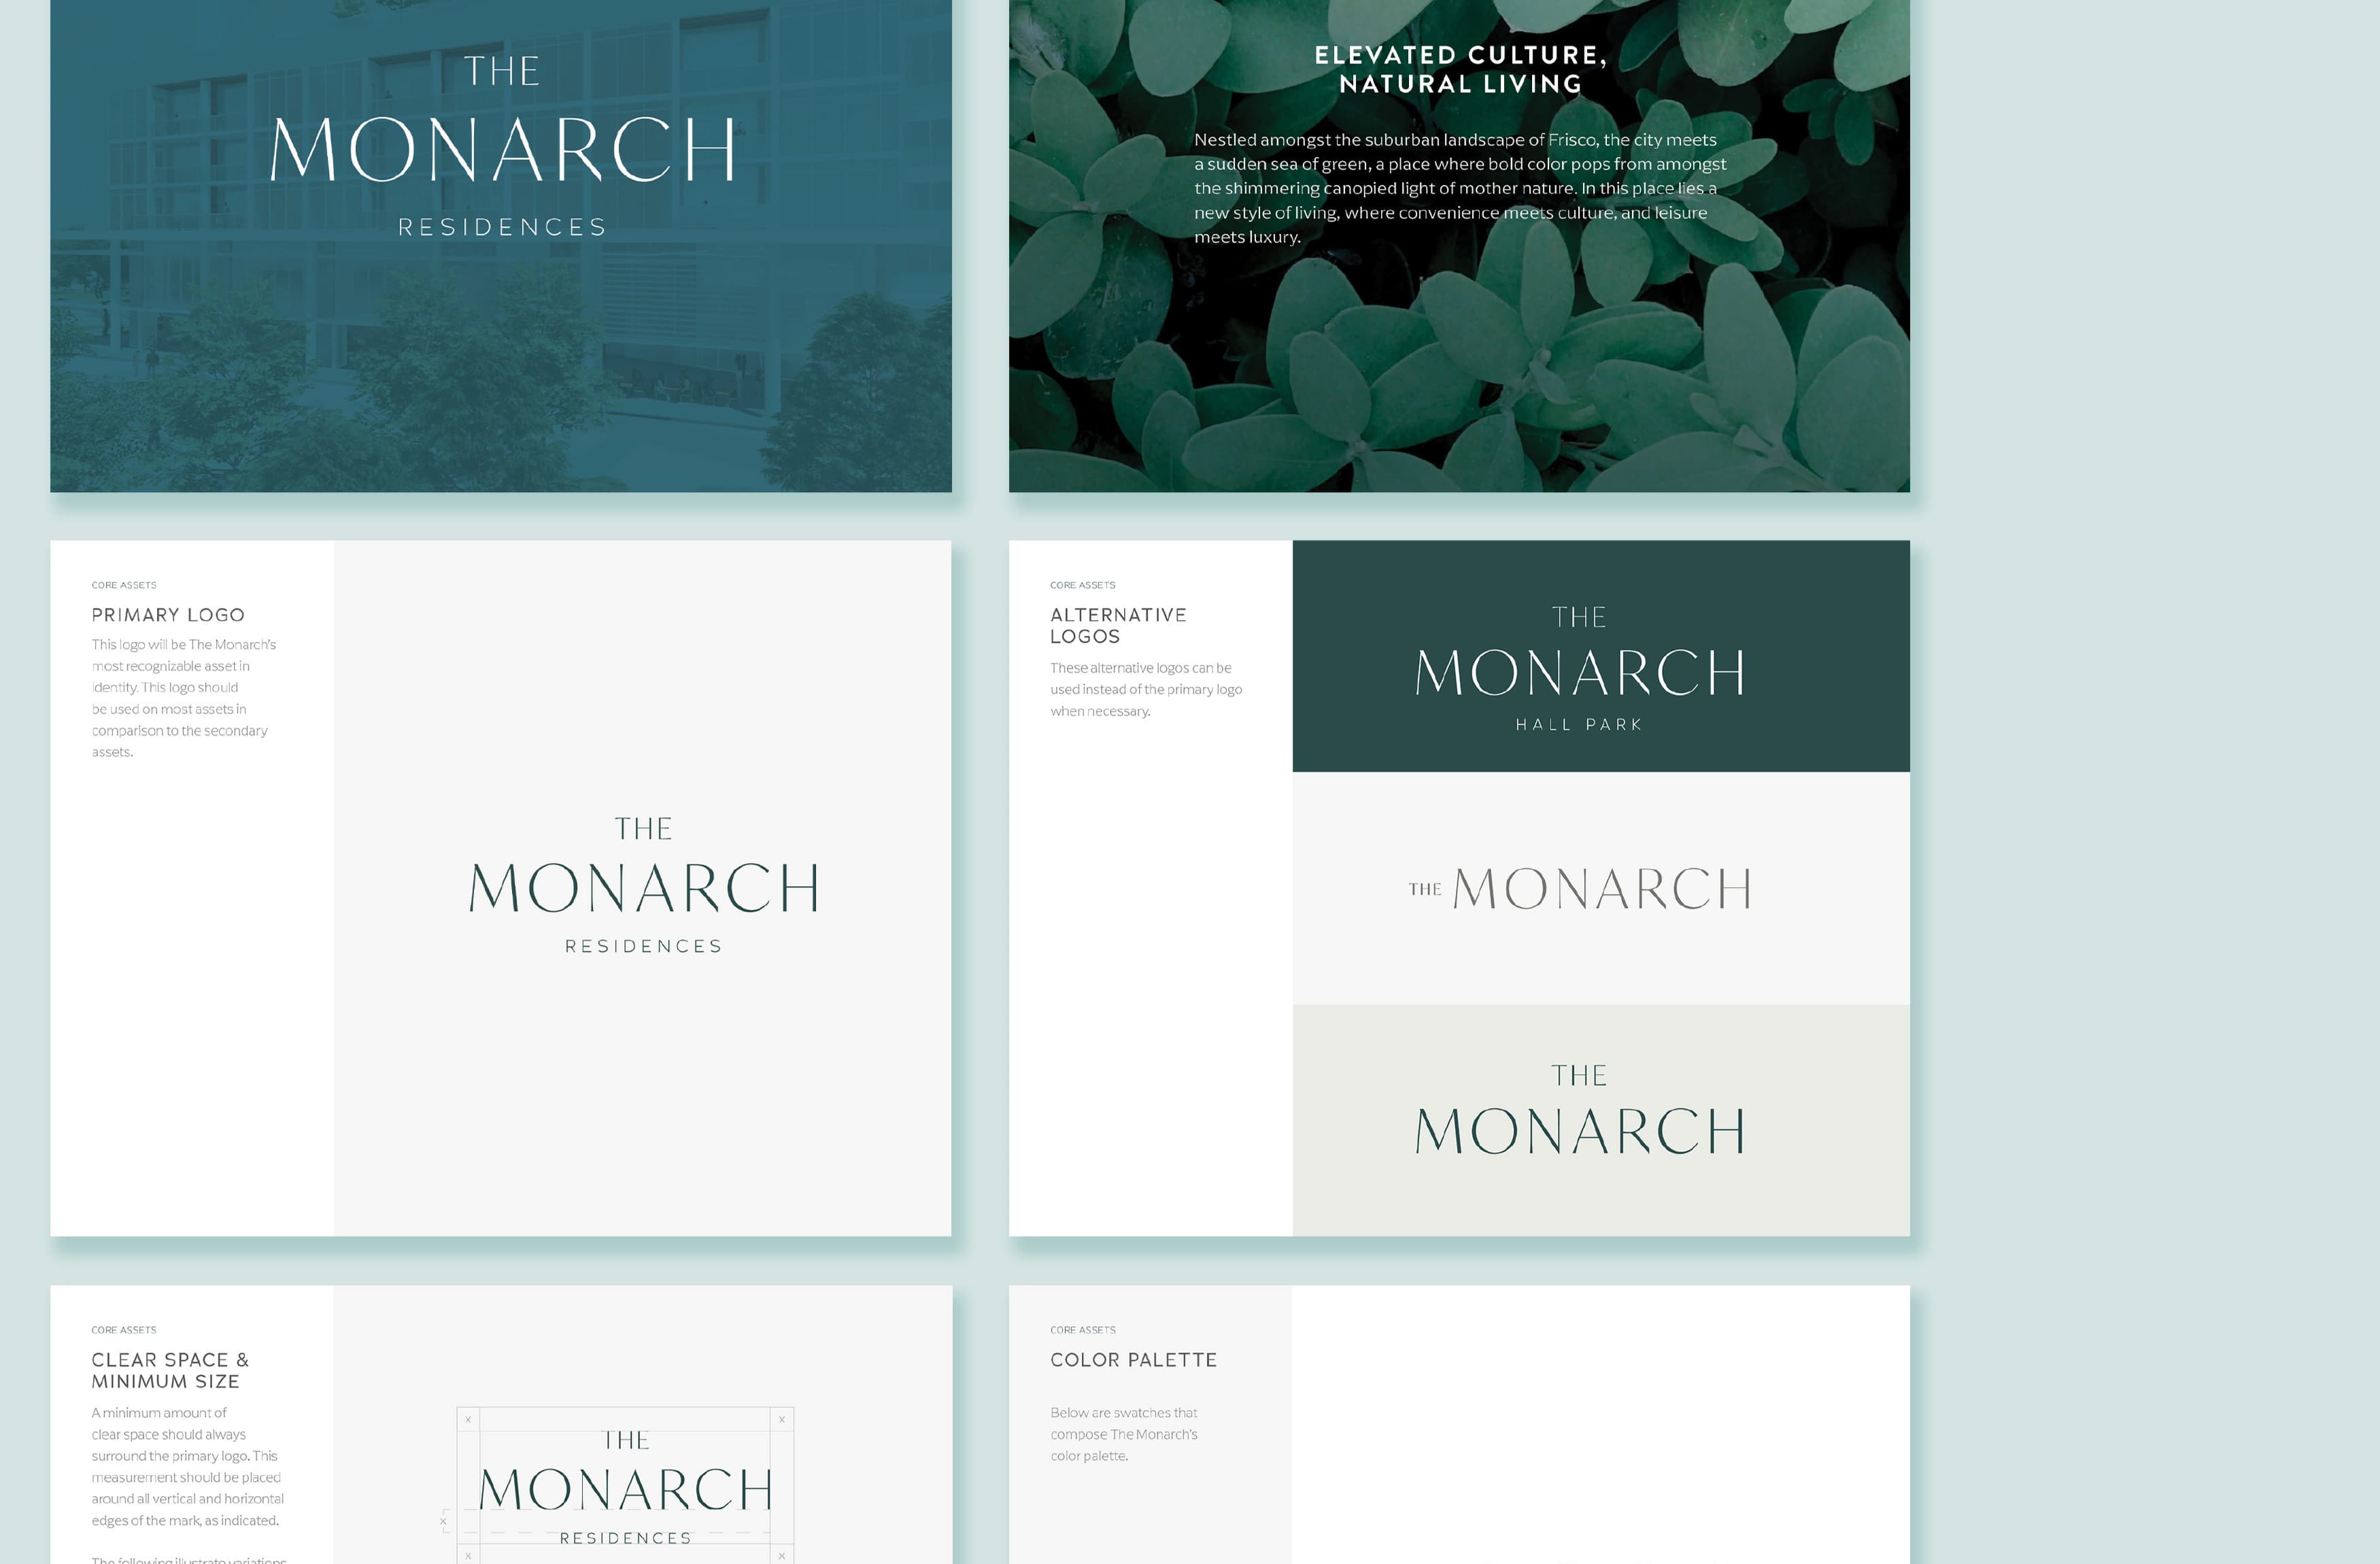 Mockup of logo & branding guidelines for The Monarch at Hall Park in Frisco, Texas